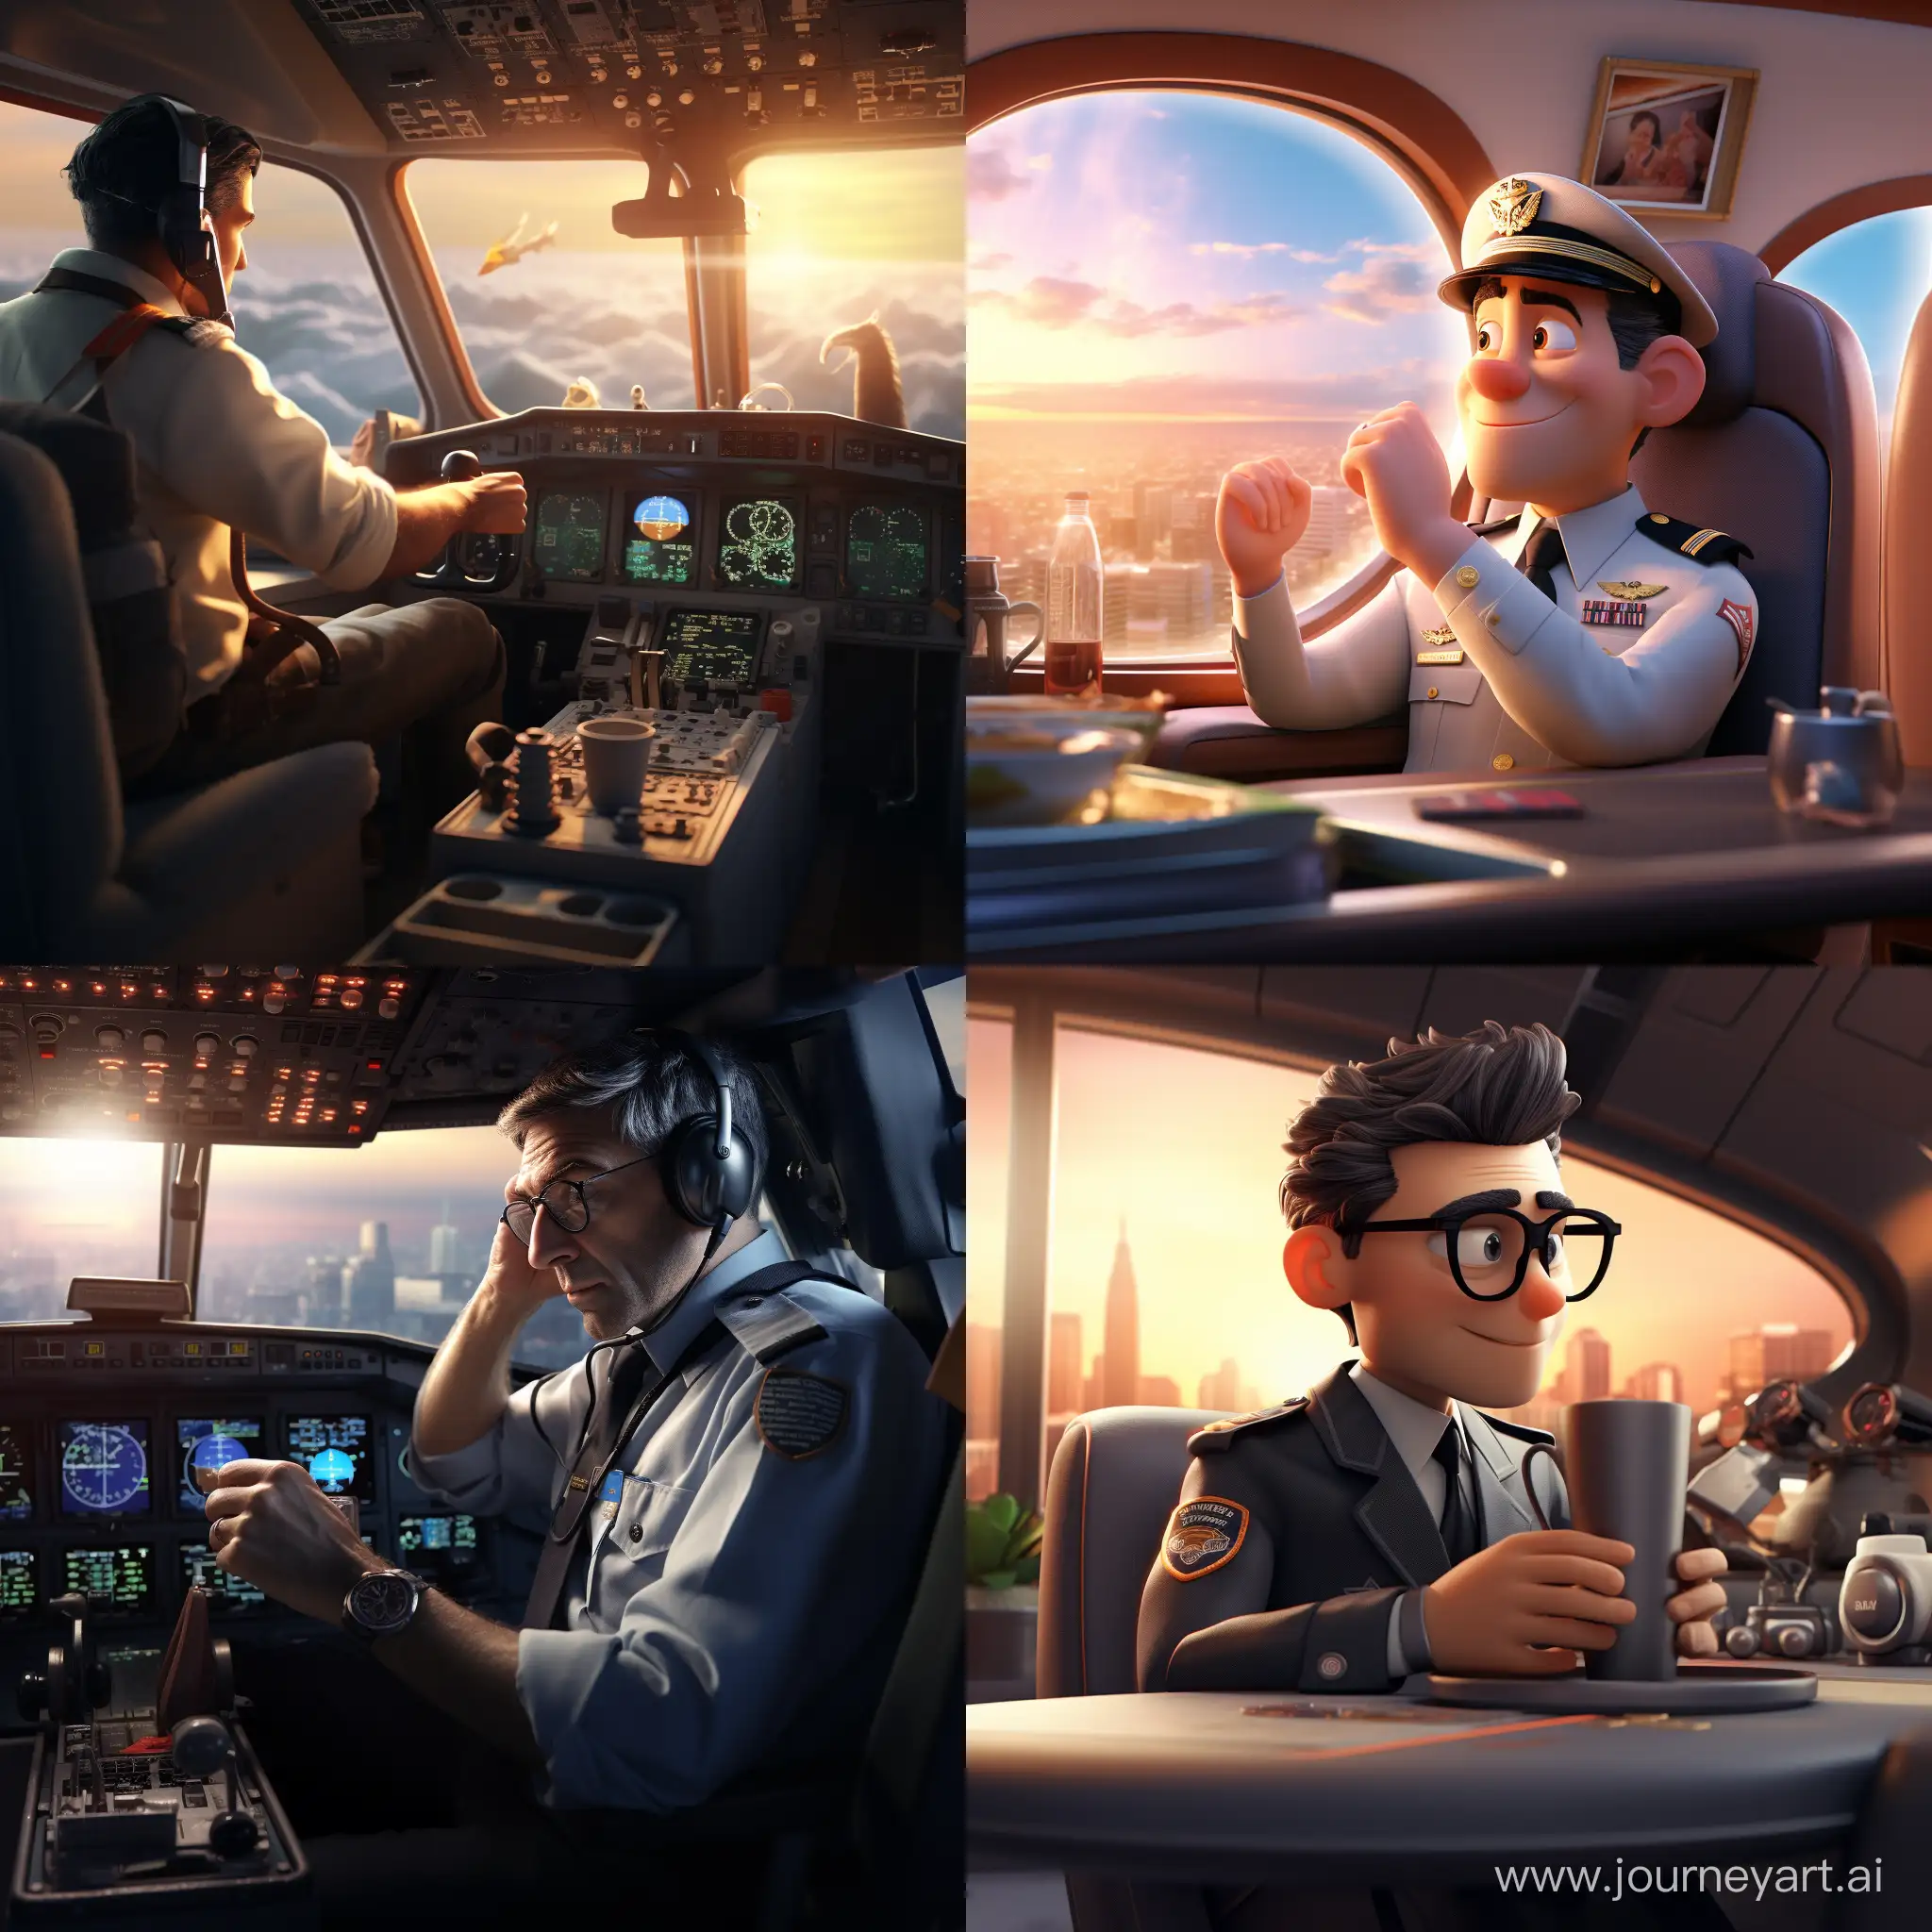 Pilot-Enjoying-Coffee-at-Airplane-Controls-in-3D-Animation